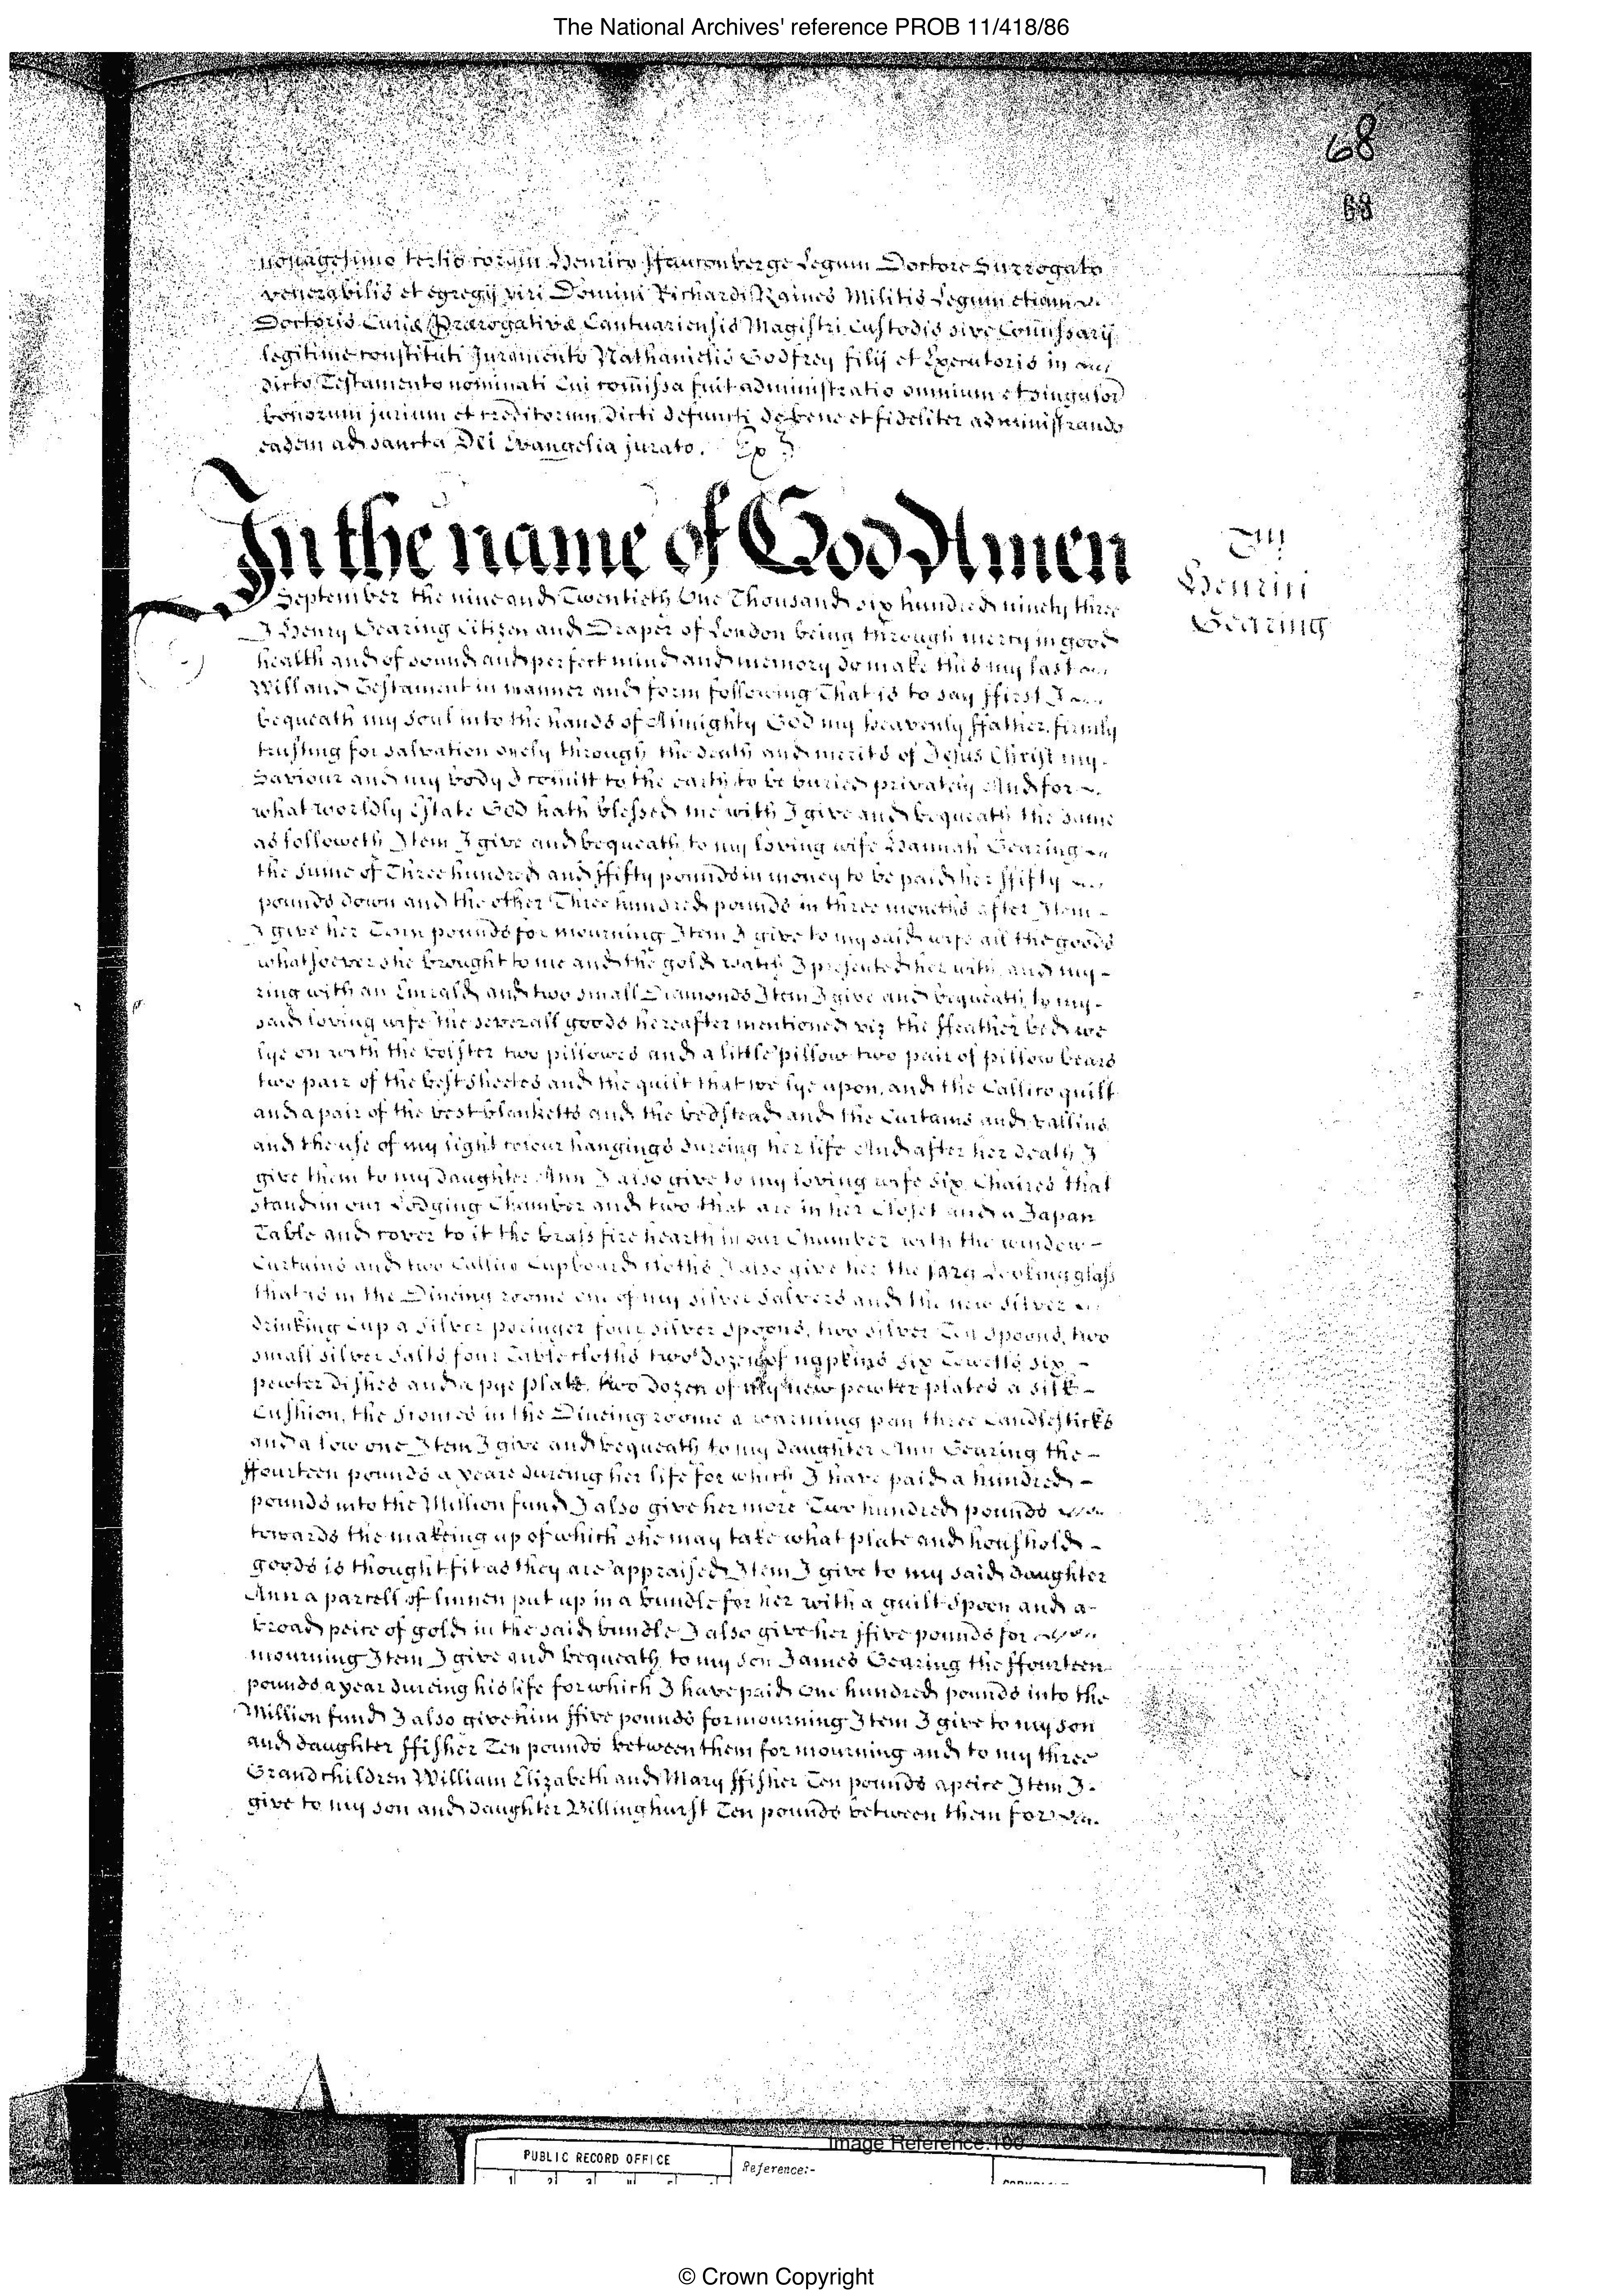 Will of Henry Gearing of 1693